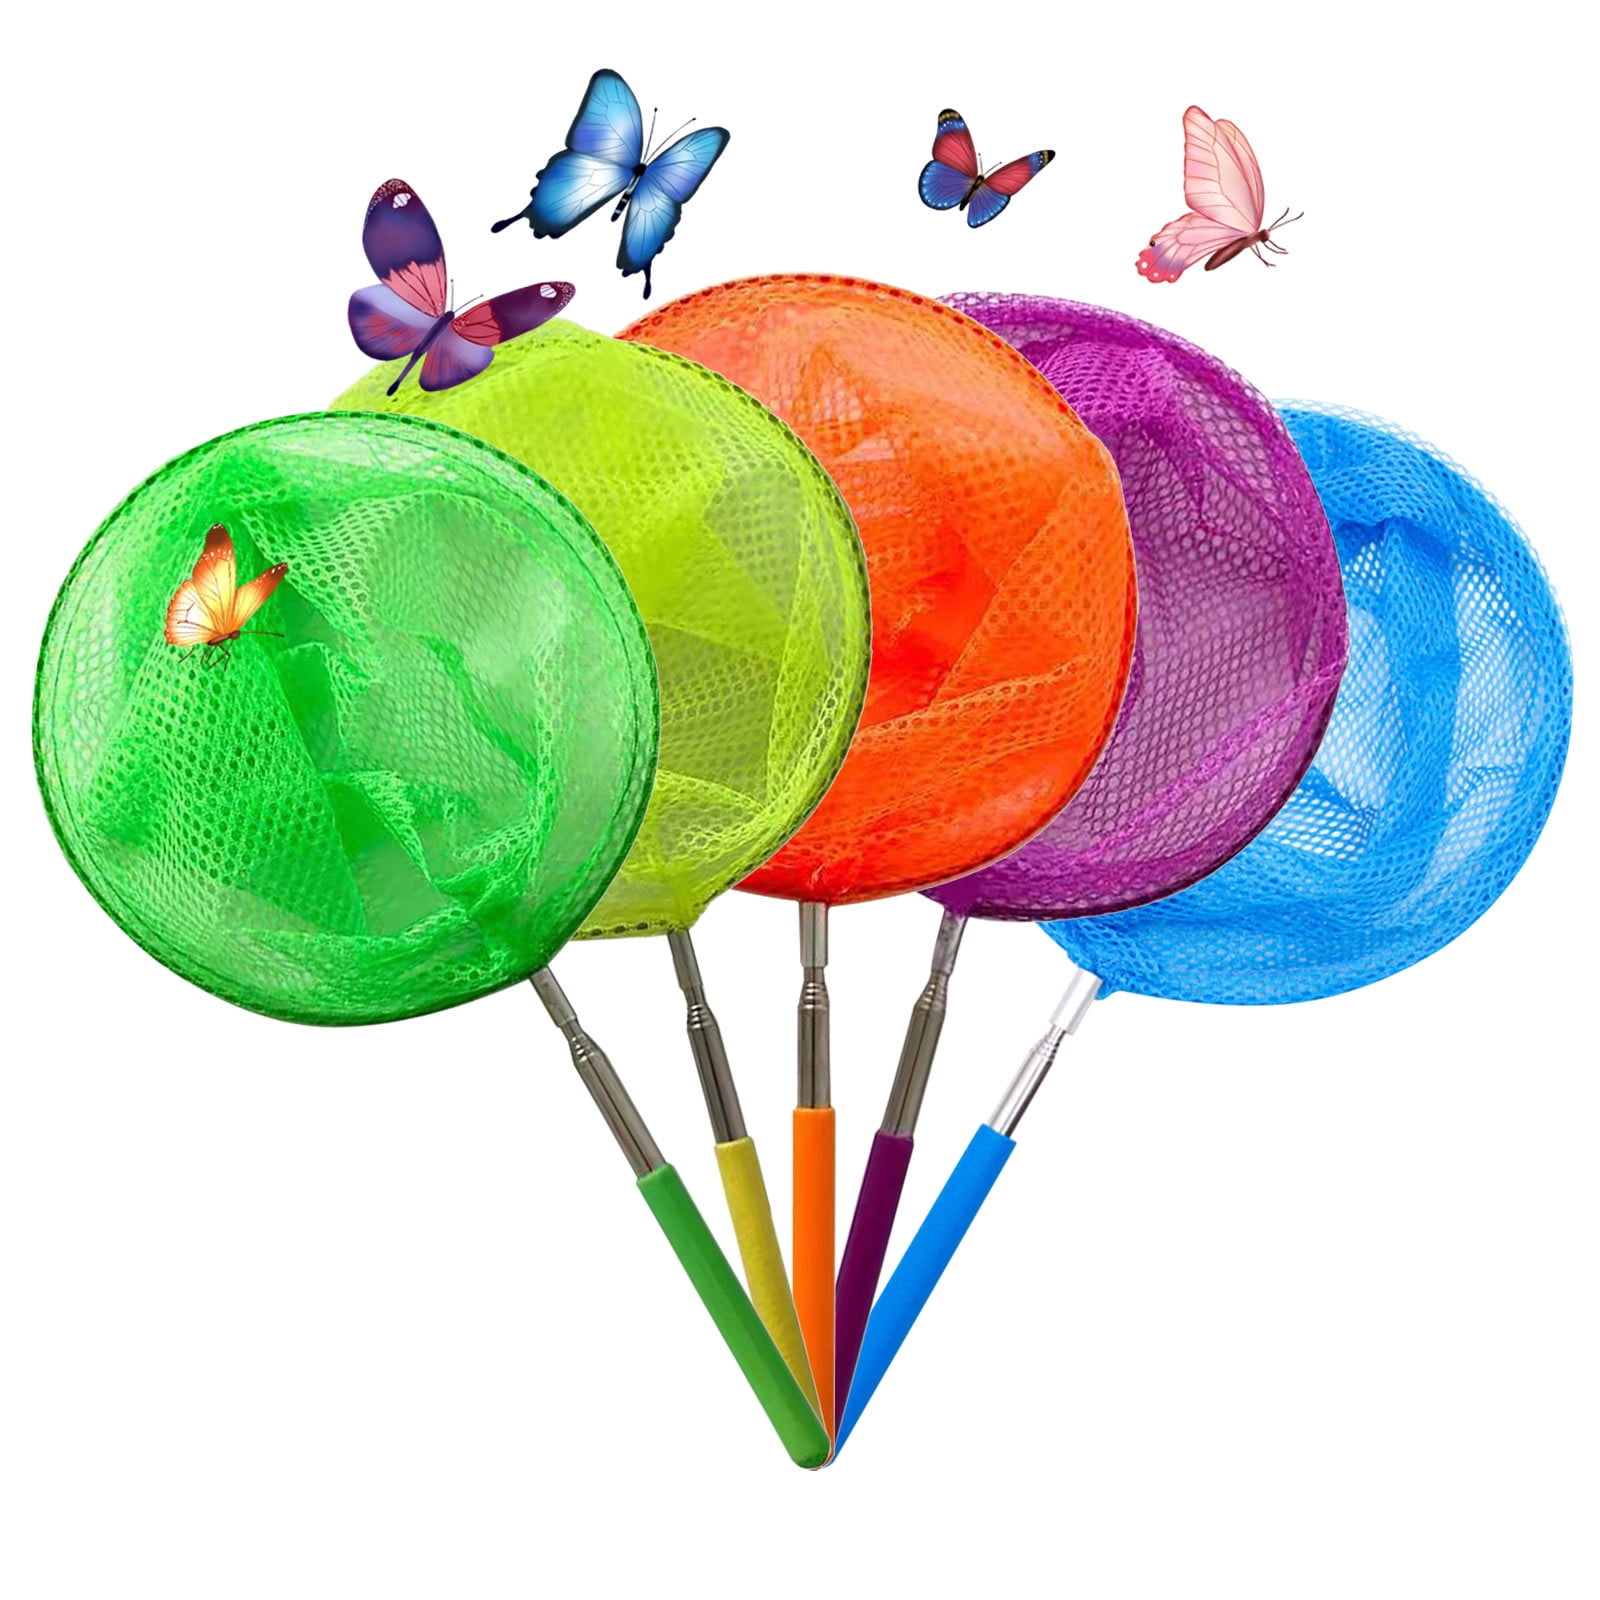 HOONEW 3 Pieces Kids Fishing Net Catching Butterflies Bug Beach Toys Catch and Release Butterfly Shelling Dip Net 